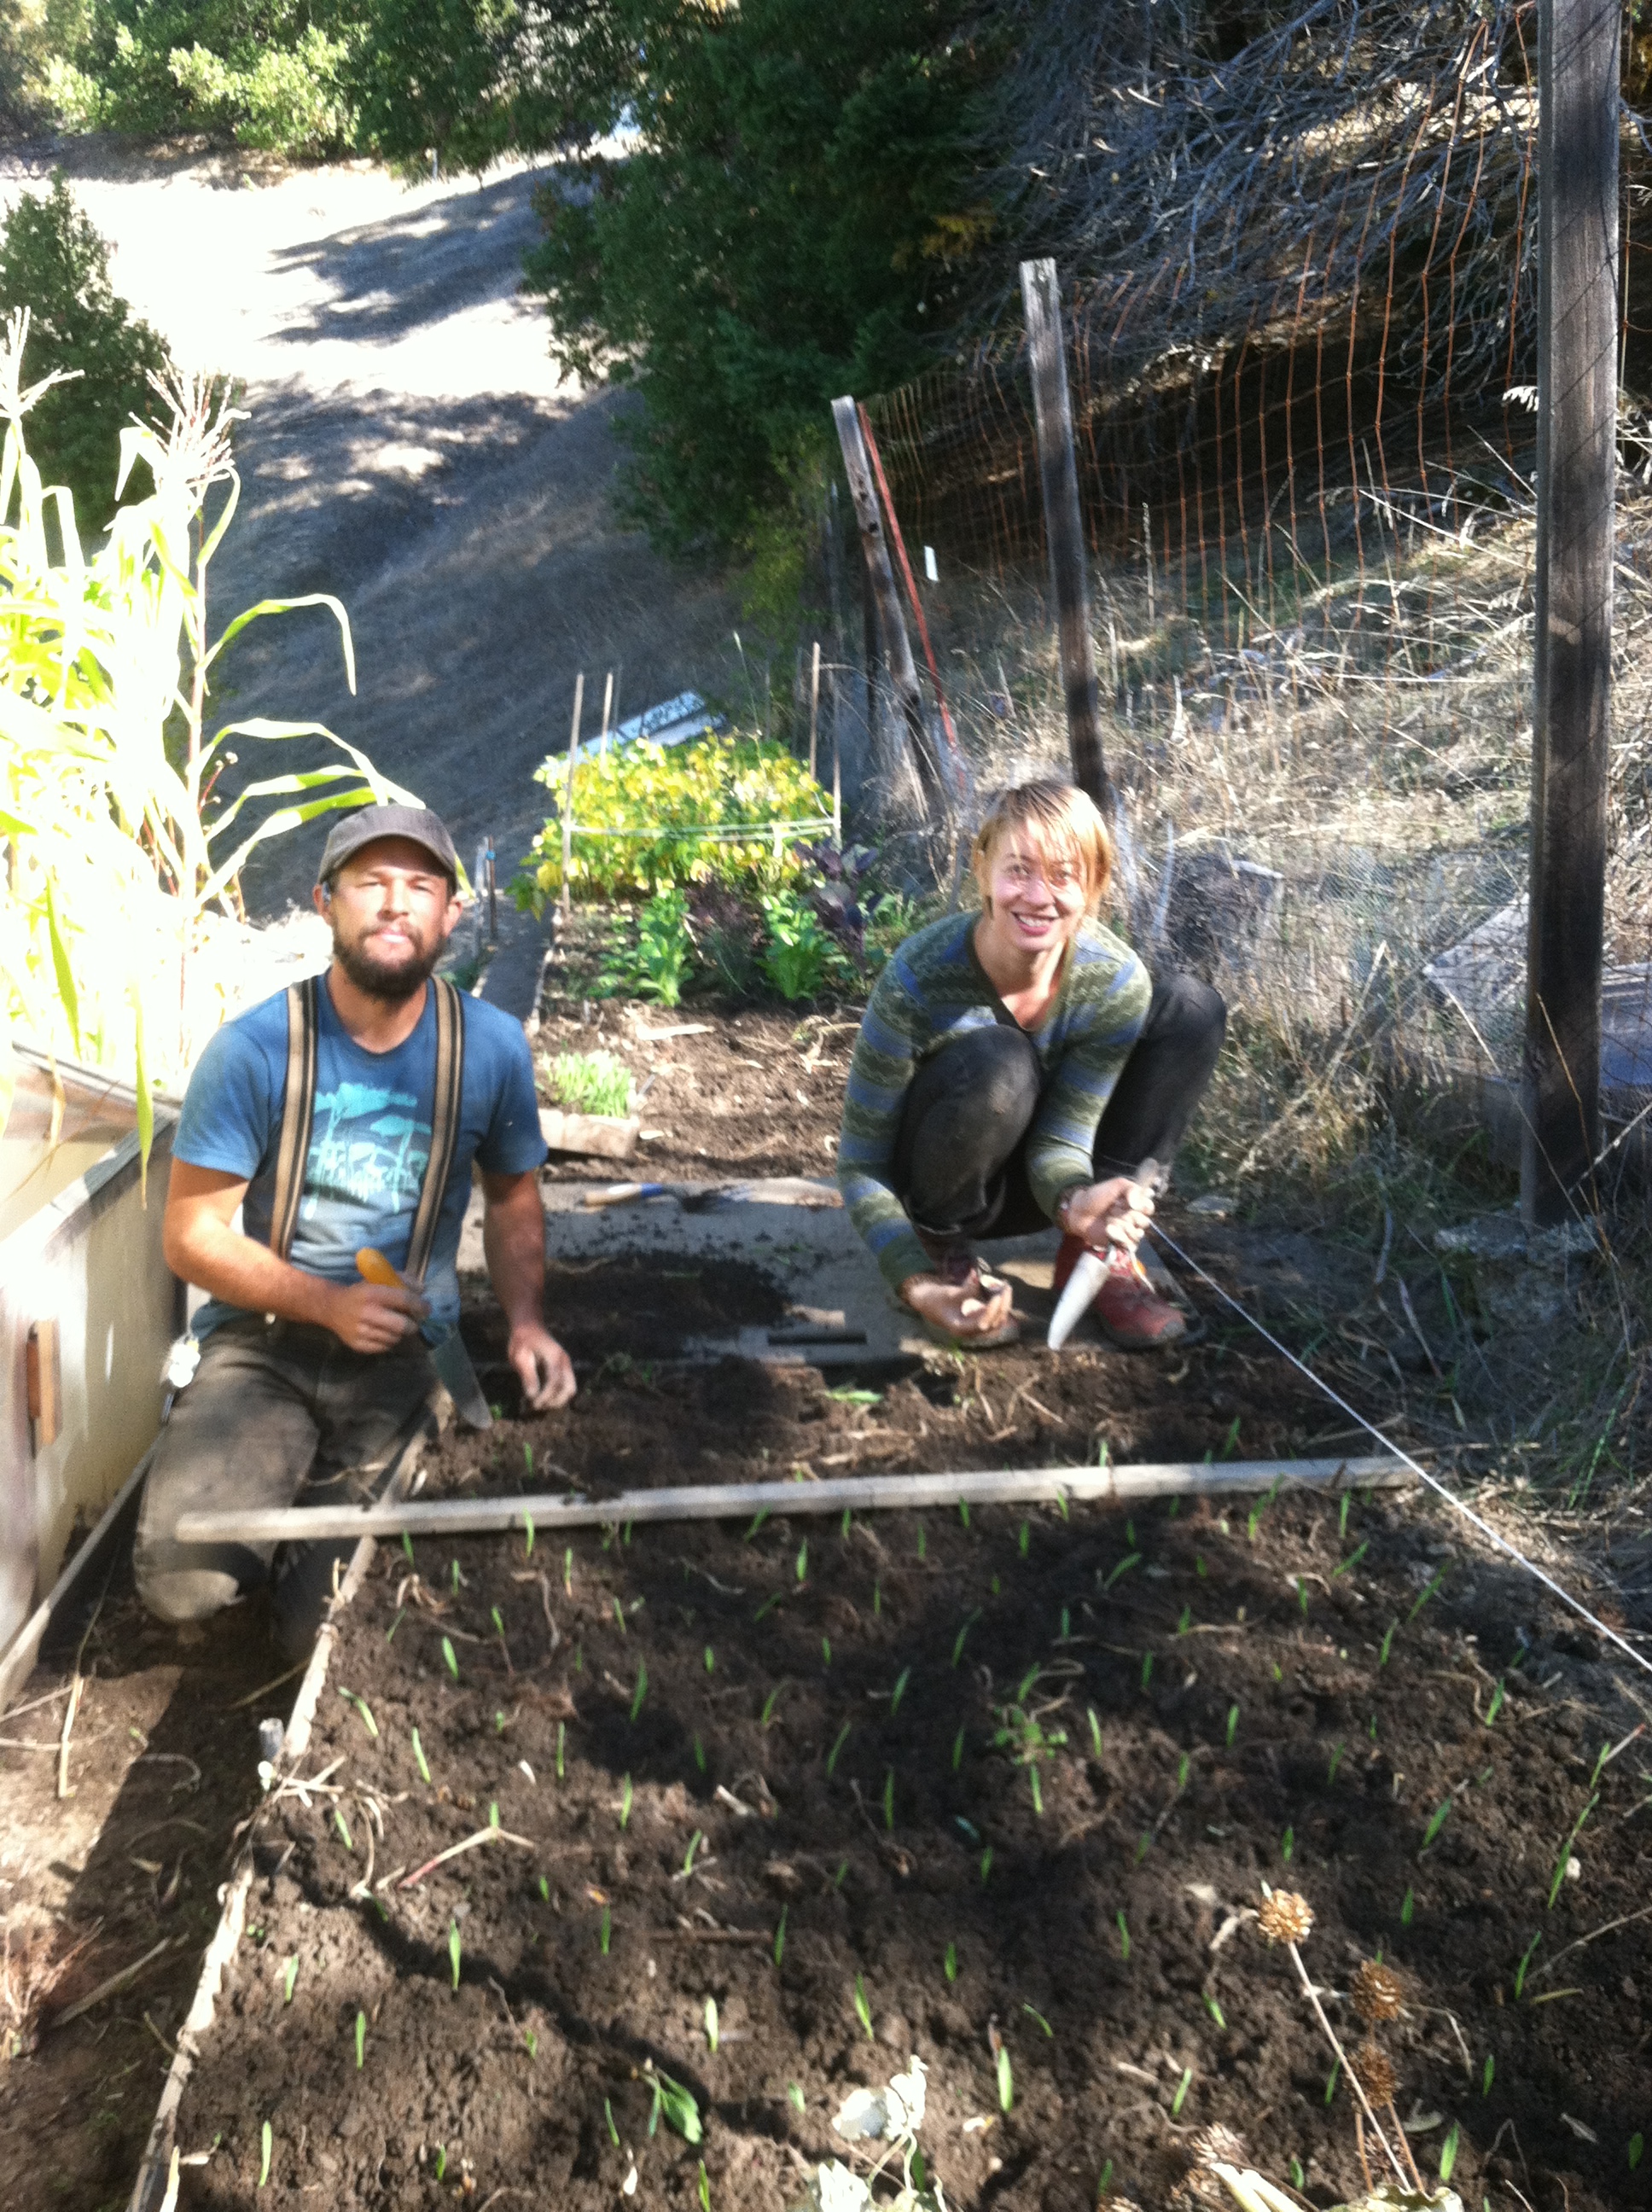 Eric and Renee in the garden, planting seedlings